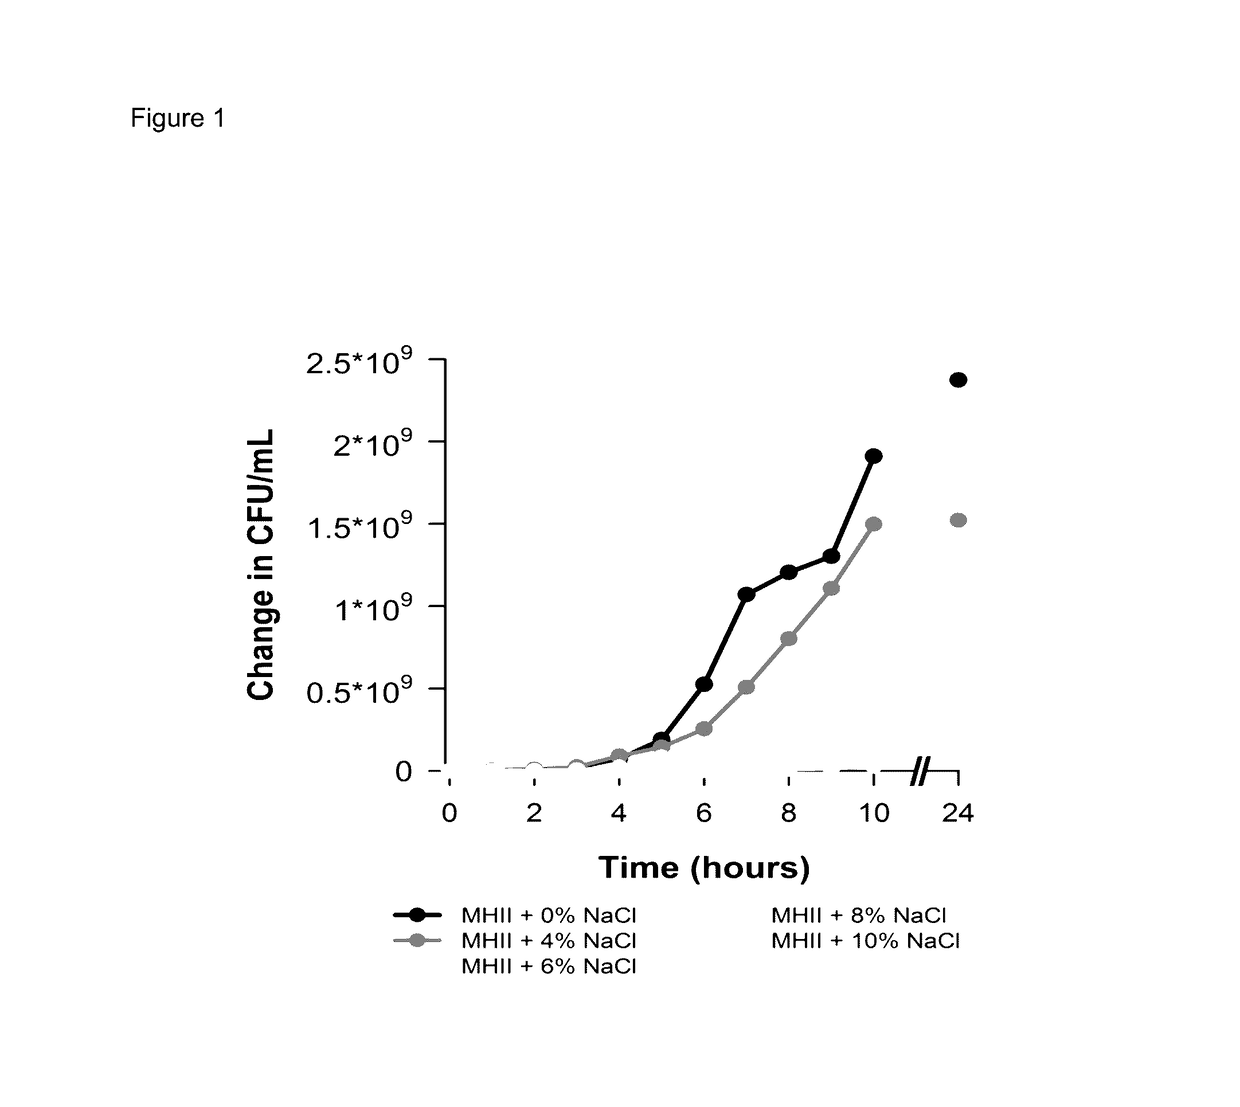 Method for shortening Anti-infective therapy duration in subjects with infection